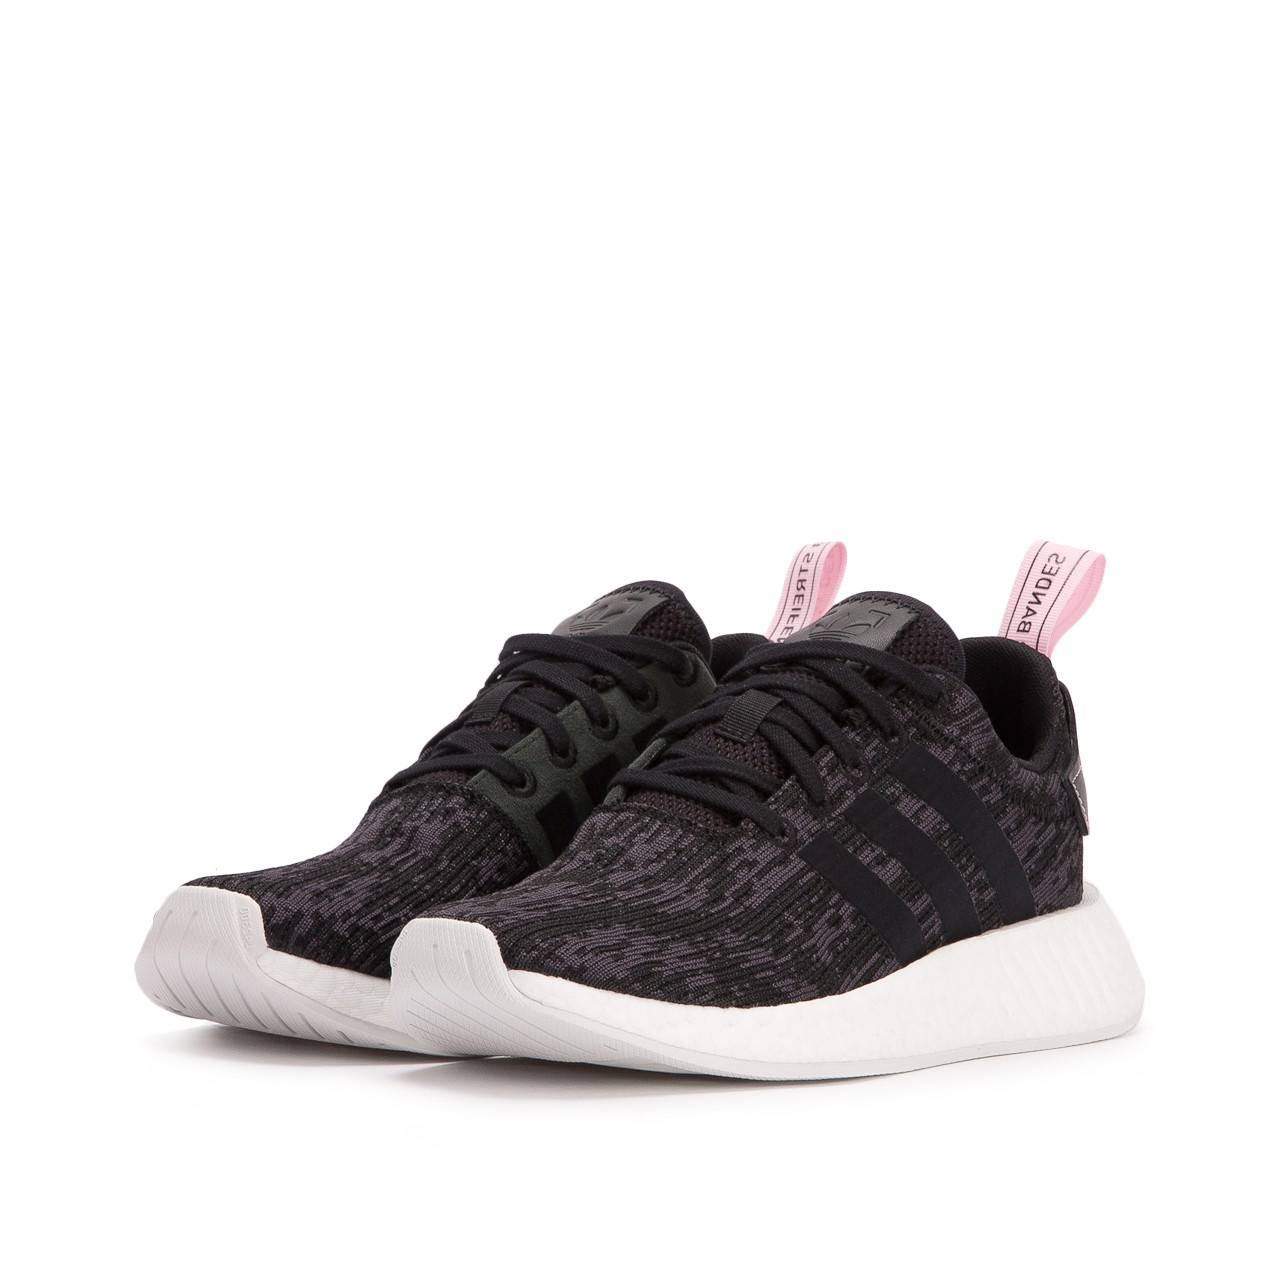 Giày thể thao Adidas Originals NMD R2 Boost W black / white BY9314